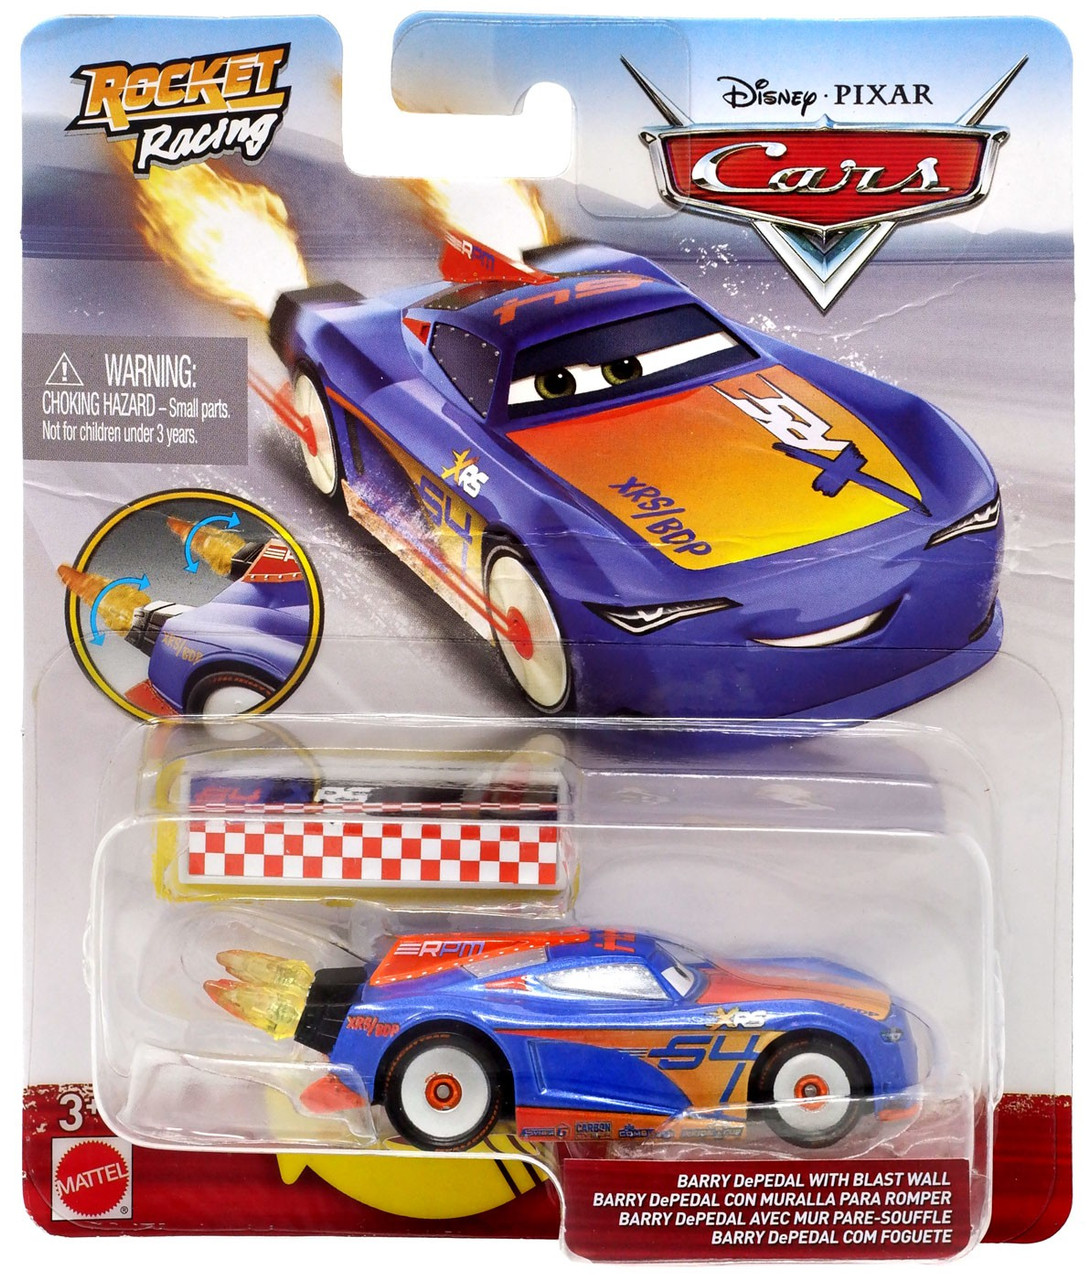 Disney Pixar Cars Cars 3 Rocket Racing Barry Depedal With Blast Wall 155 Diecast Car Mattel Toys Toywiz - cars 3 full movie game roblox cars 3 lego cars 3 cars movie cars 3 crash cars for kids